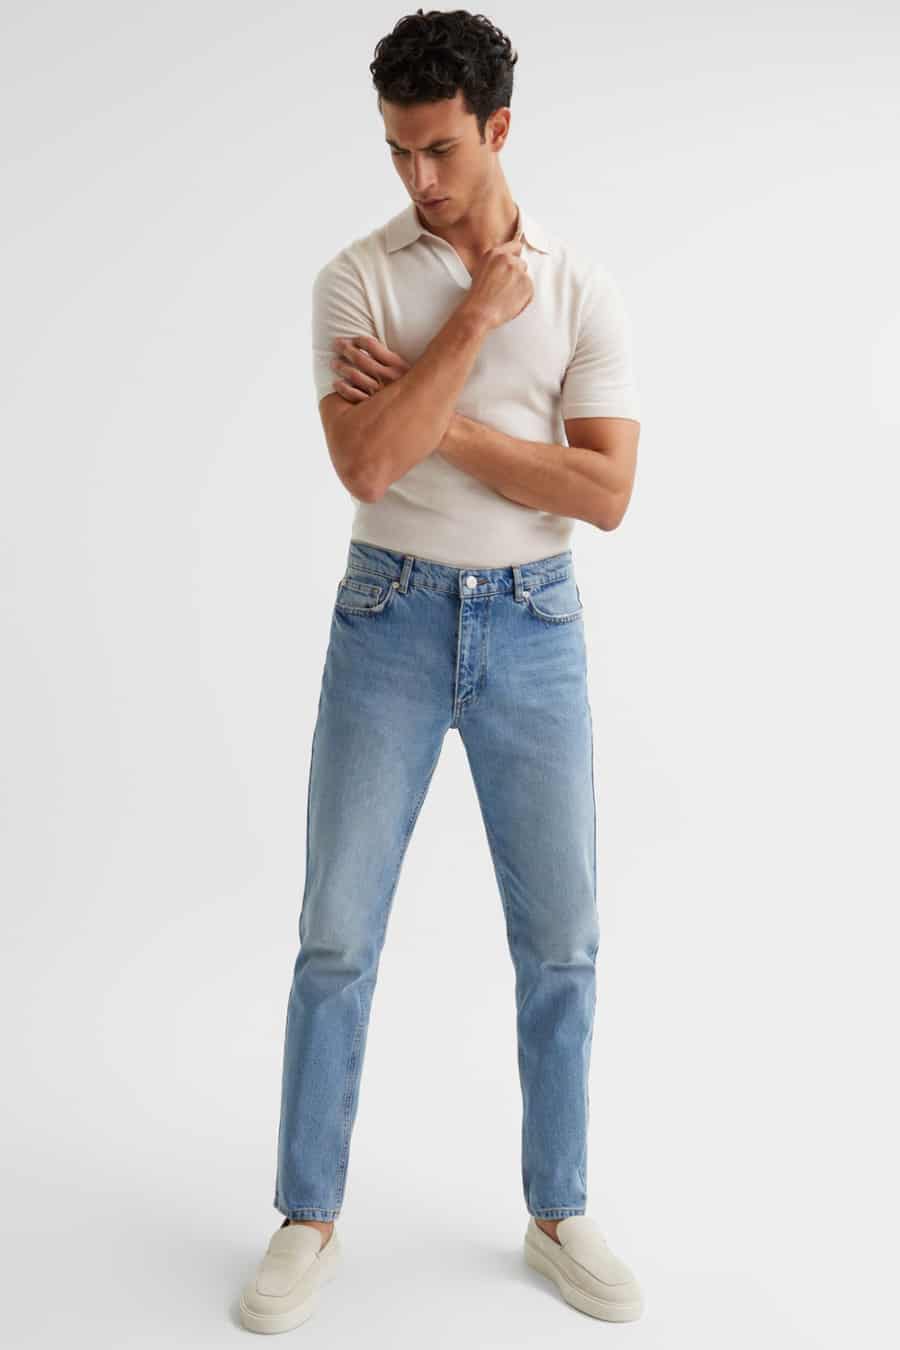 Men's light wash jeans, off-white knitted polo shirt and suede loafers outfit